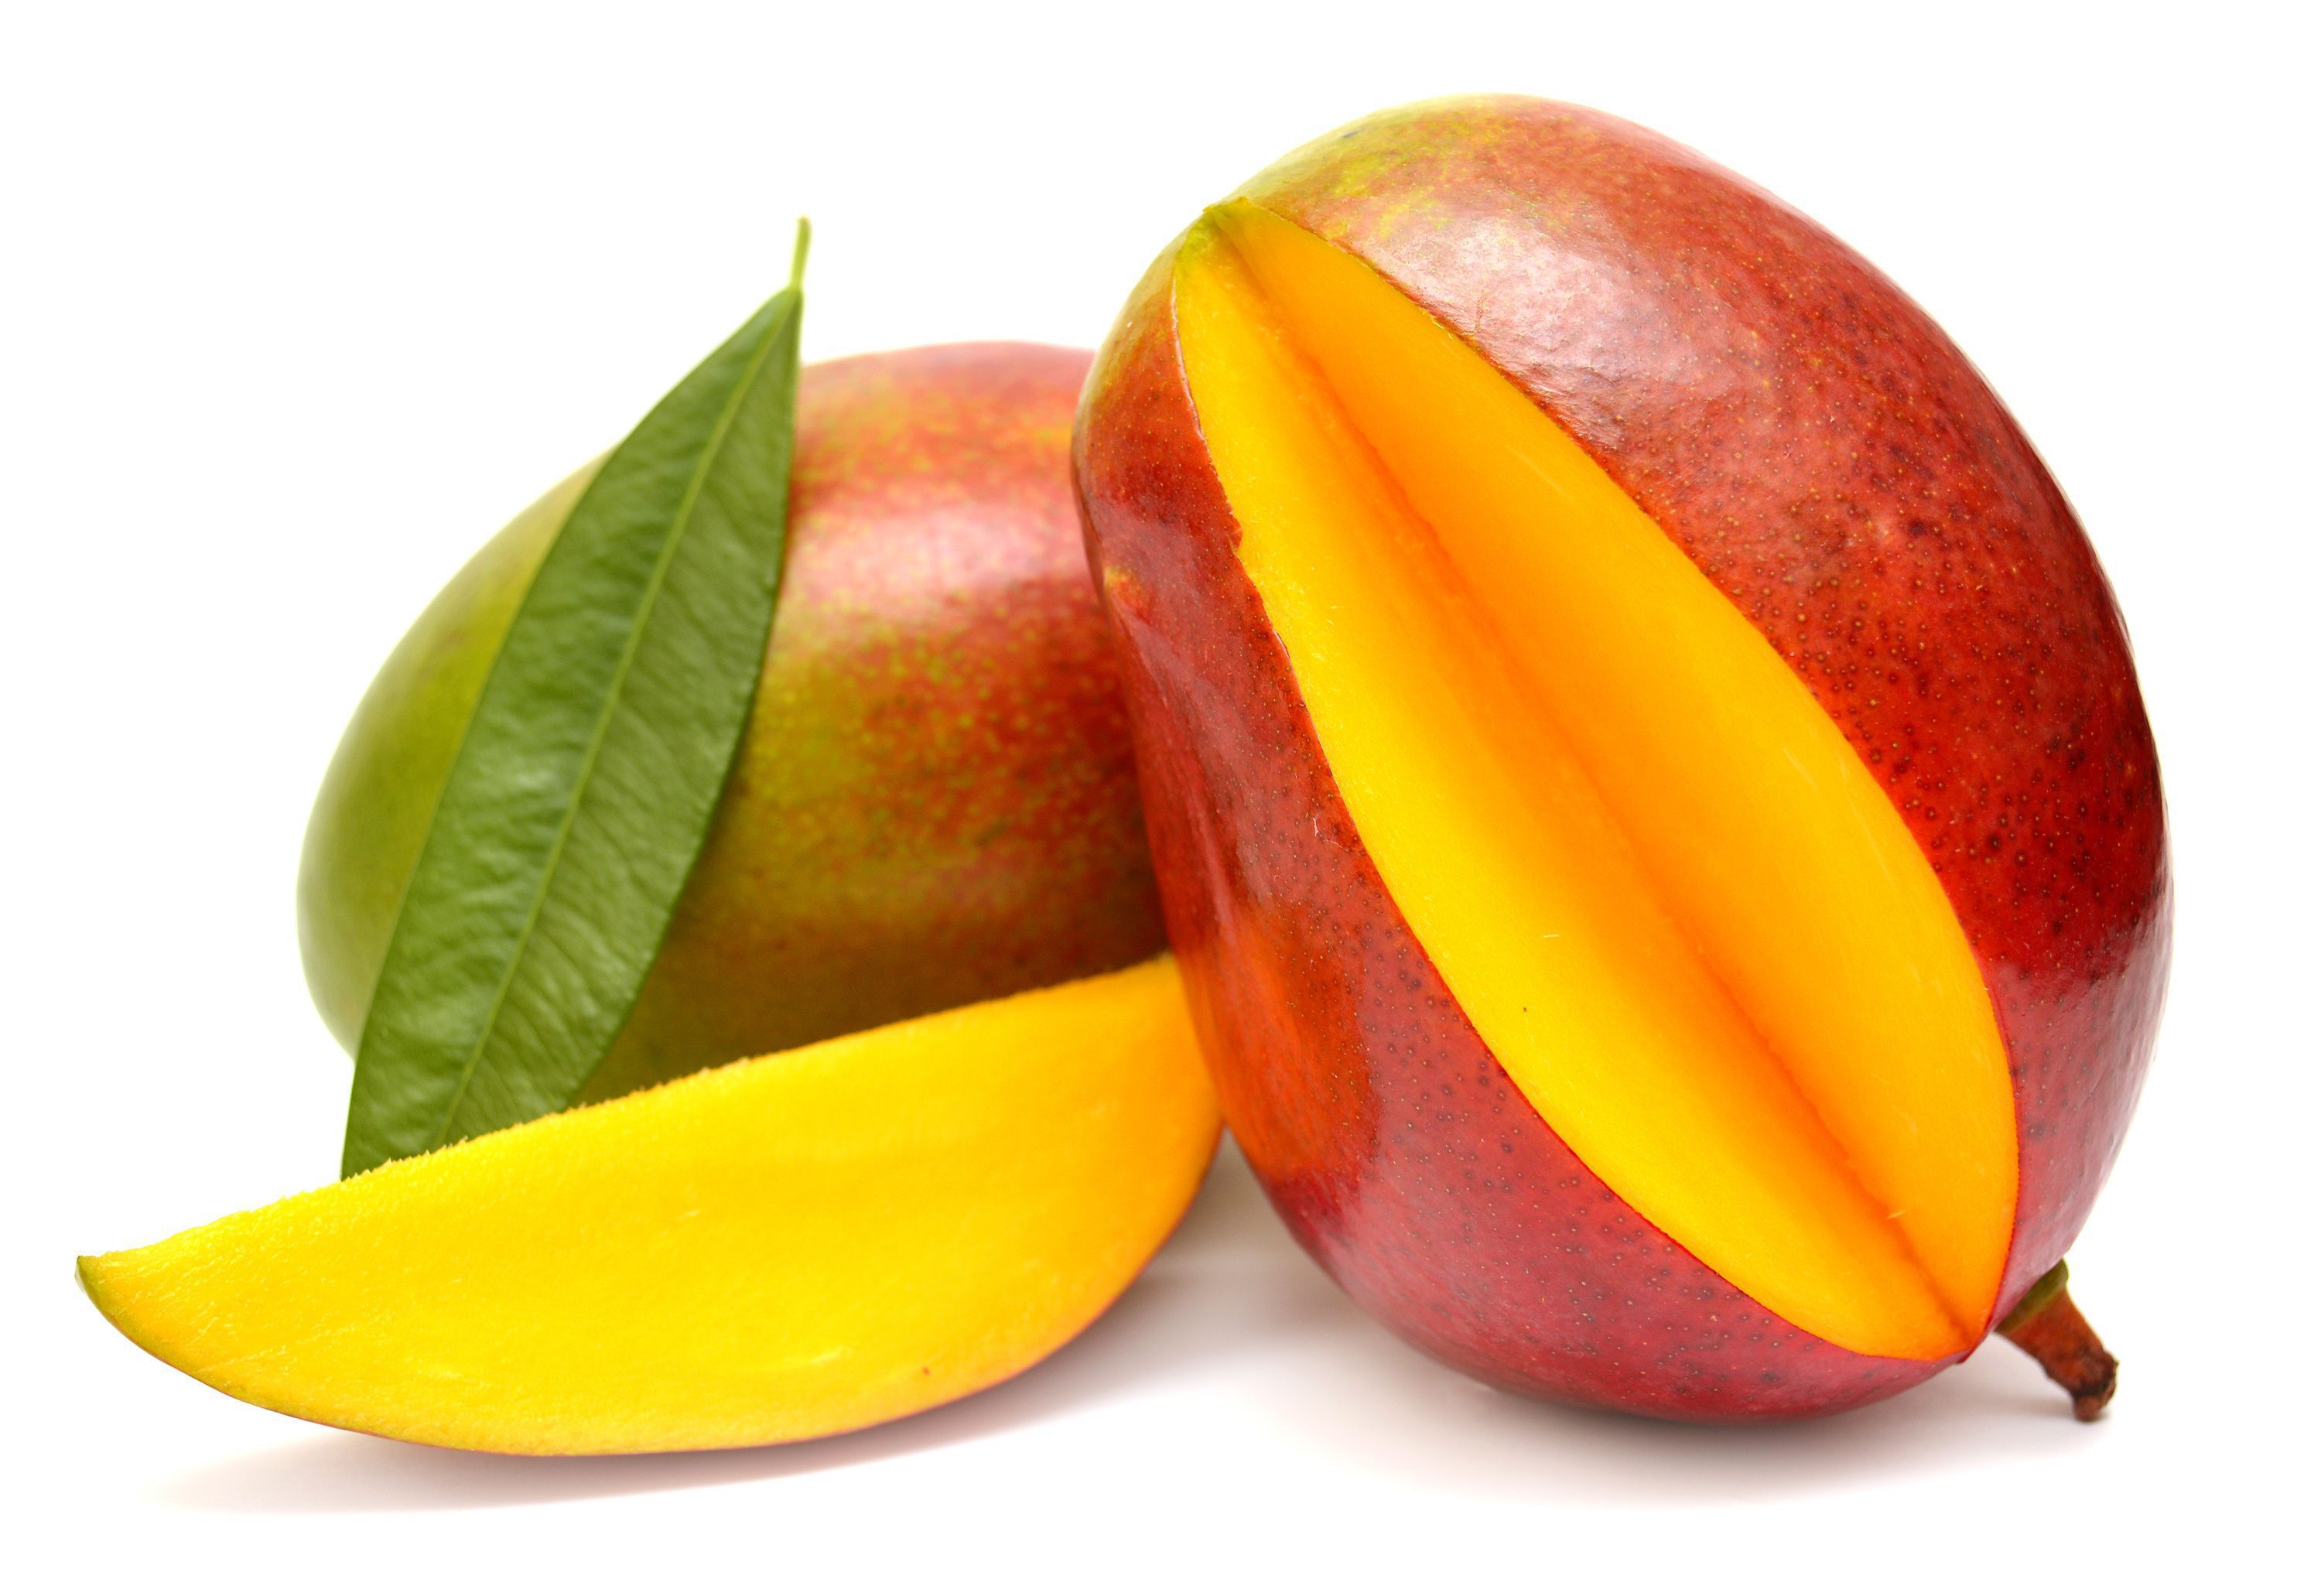  Mango Wallpapers Images Photos Pictures Backgrounds